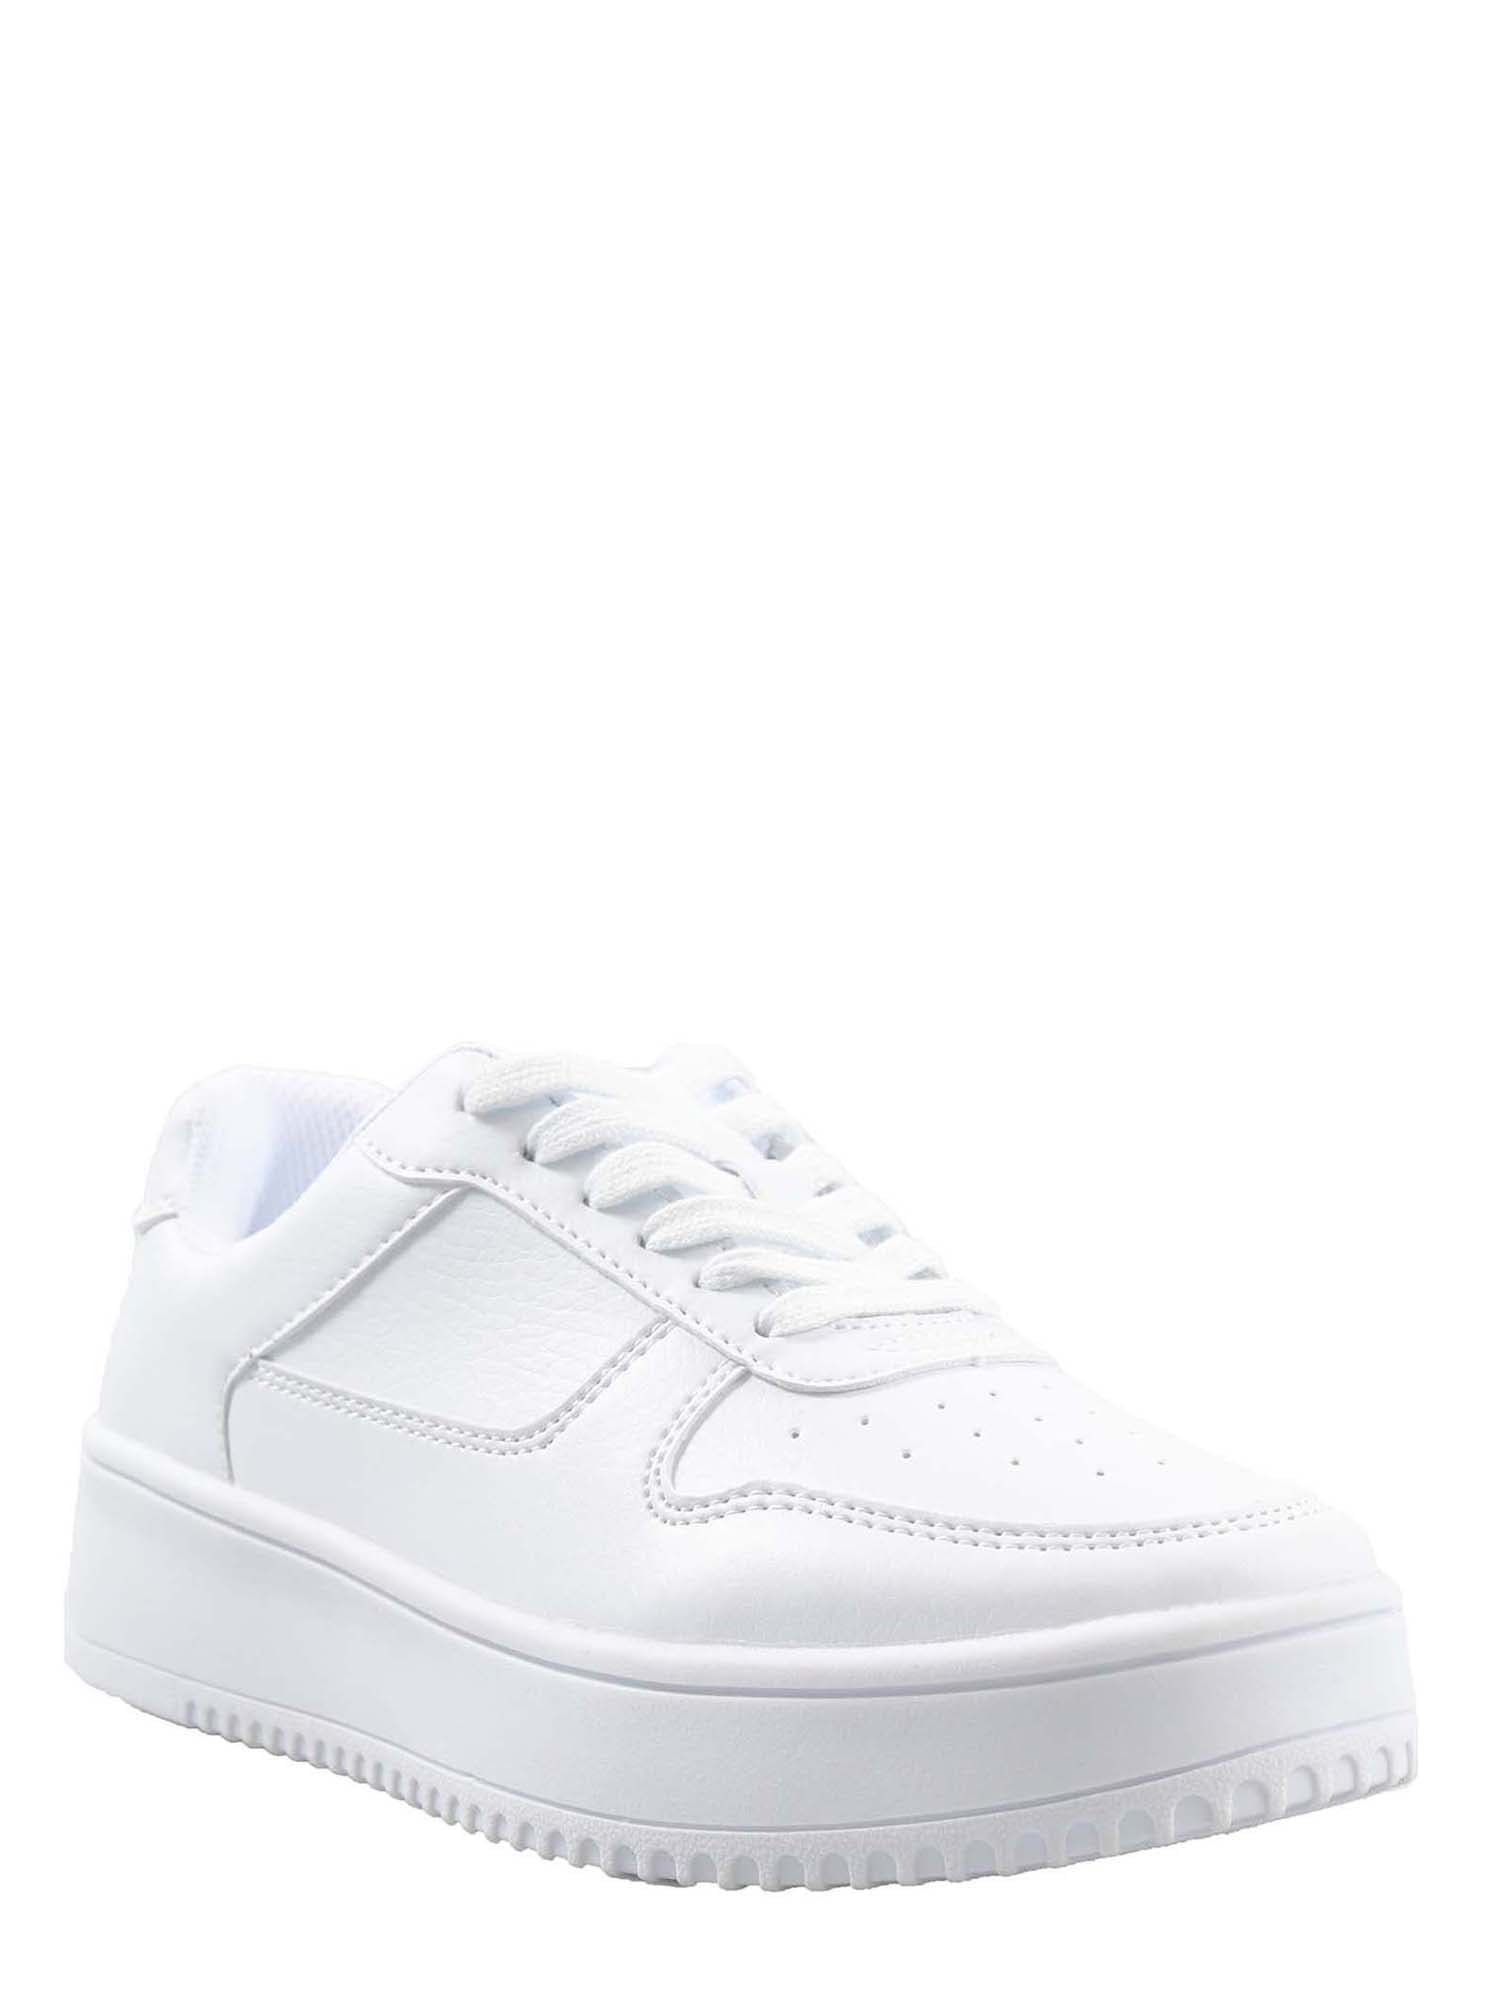 Time and Tru Women's Platform Sneakers, Size: 6, White